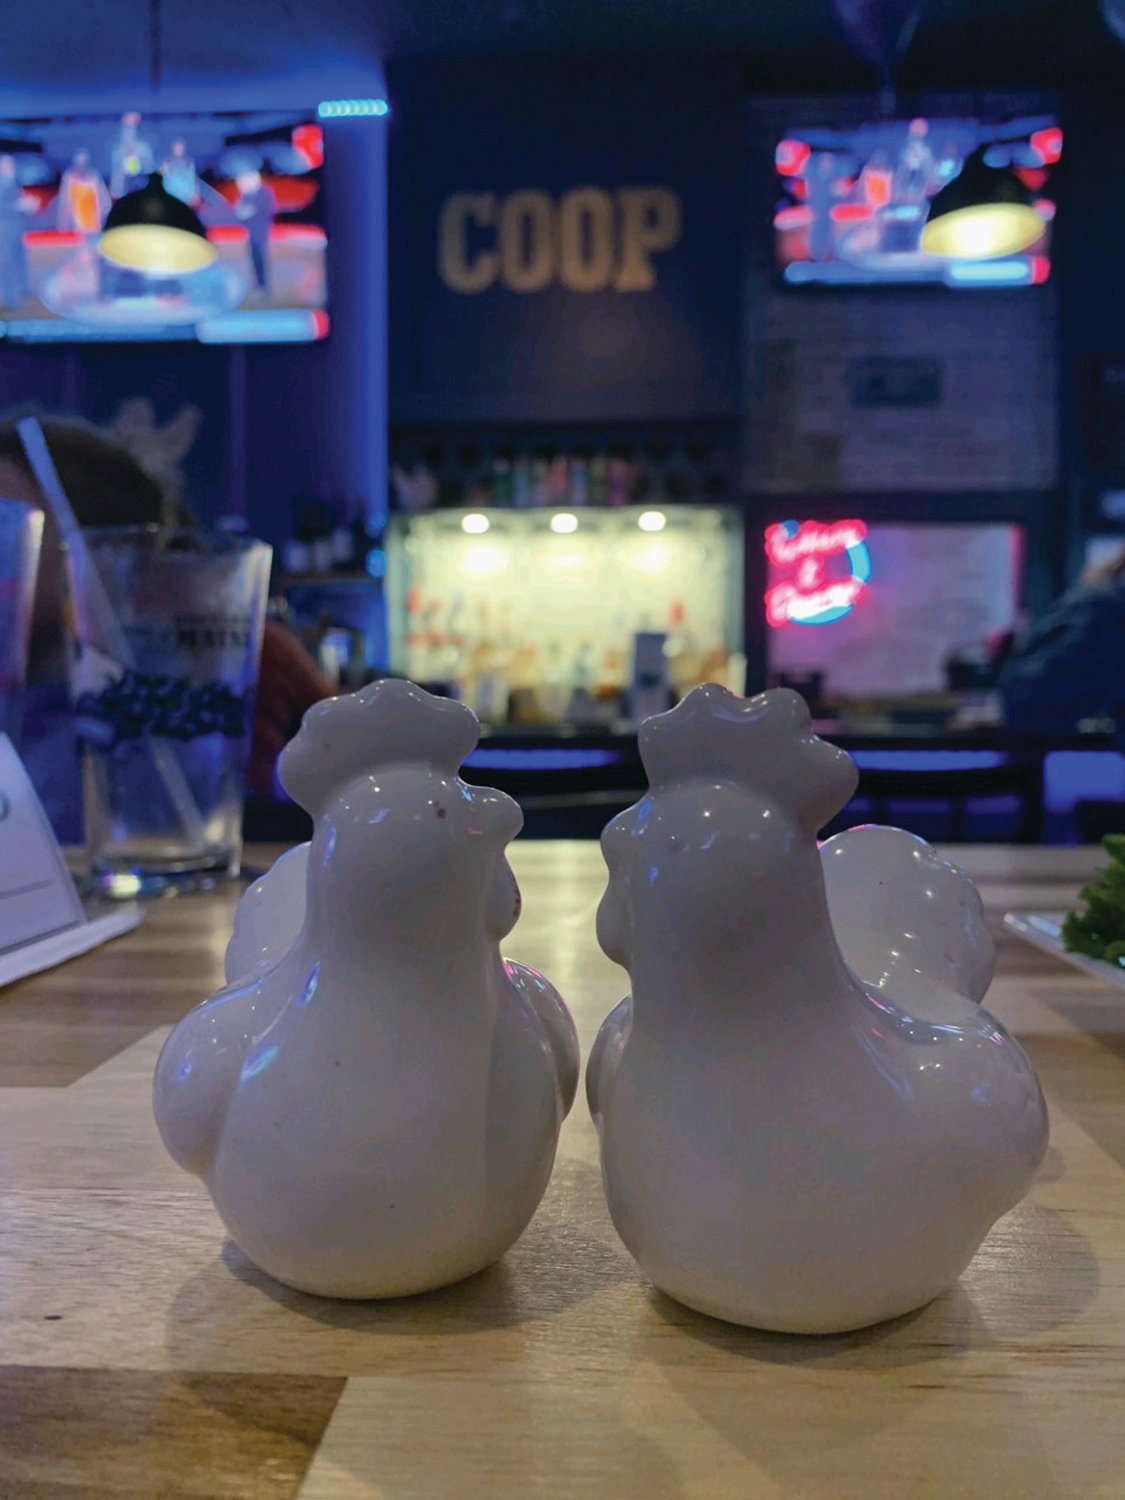 SUPER COOP: The Chicken Coop Kitchen and Bar is open seven days a week from 11:30 a.m. to 1 a.m., located in the Town Hall Lanes Plaza off Atwood Avenue in Johnston.